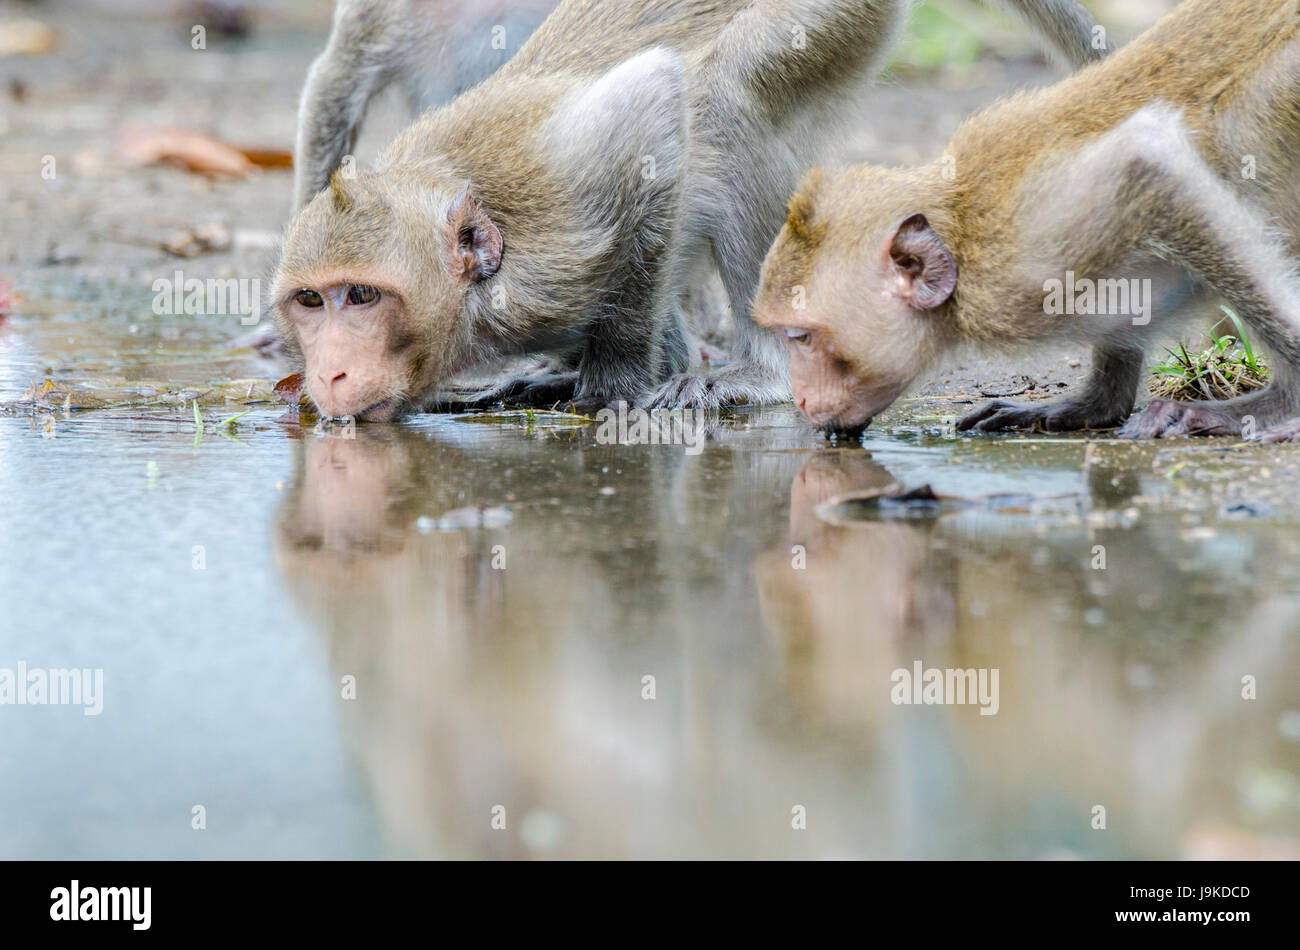 A small troop of crab-eating macaque (Macaca fascicularis) or long-tailed macaque drinking rainwater from a puddle in Thailand Stock Photo